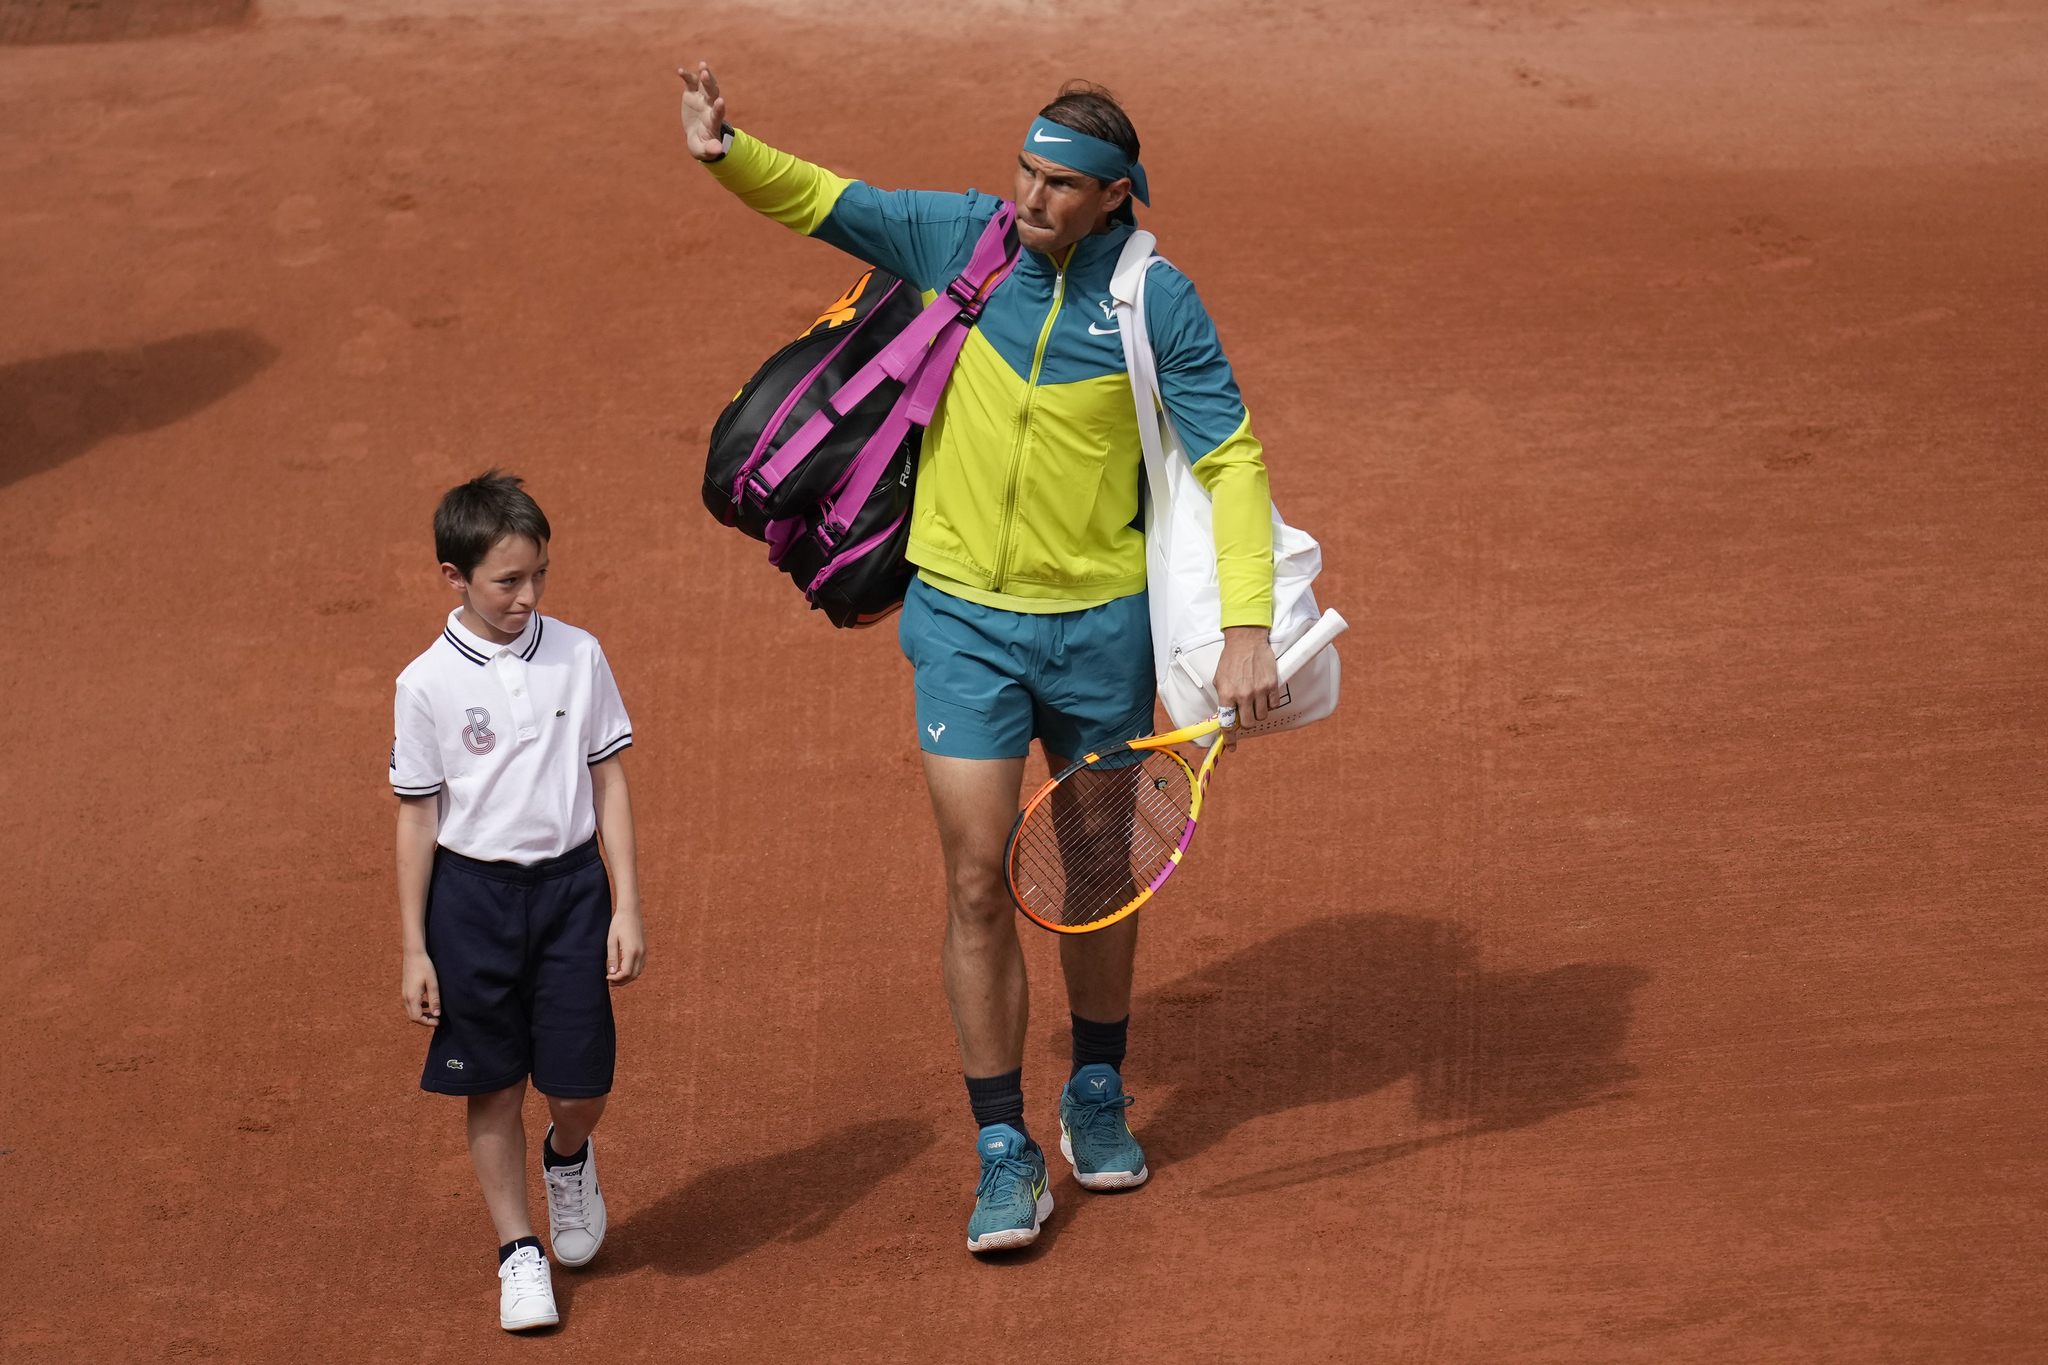 A boy accompanies Spain's Rafael  lt;HIT gt;Nadal lt;/HIT gt; as he enter center court for his first round match against Australia's Jordan Thompson at the French Open tennis tournament in Roland Garros stadium in Paris, France, Monday, May 23, 2022. (AP Photo/Christophe Ena)